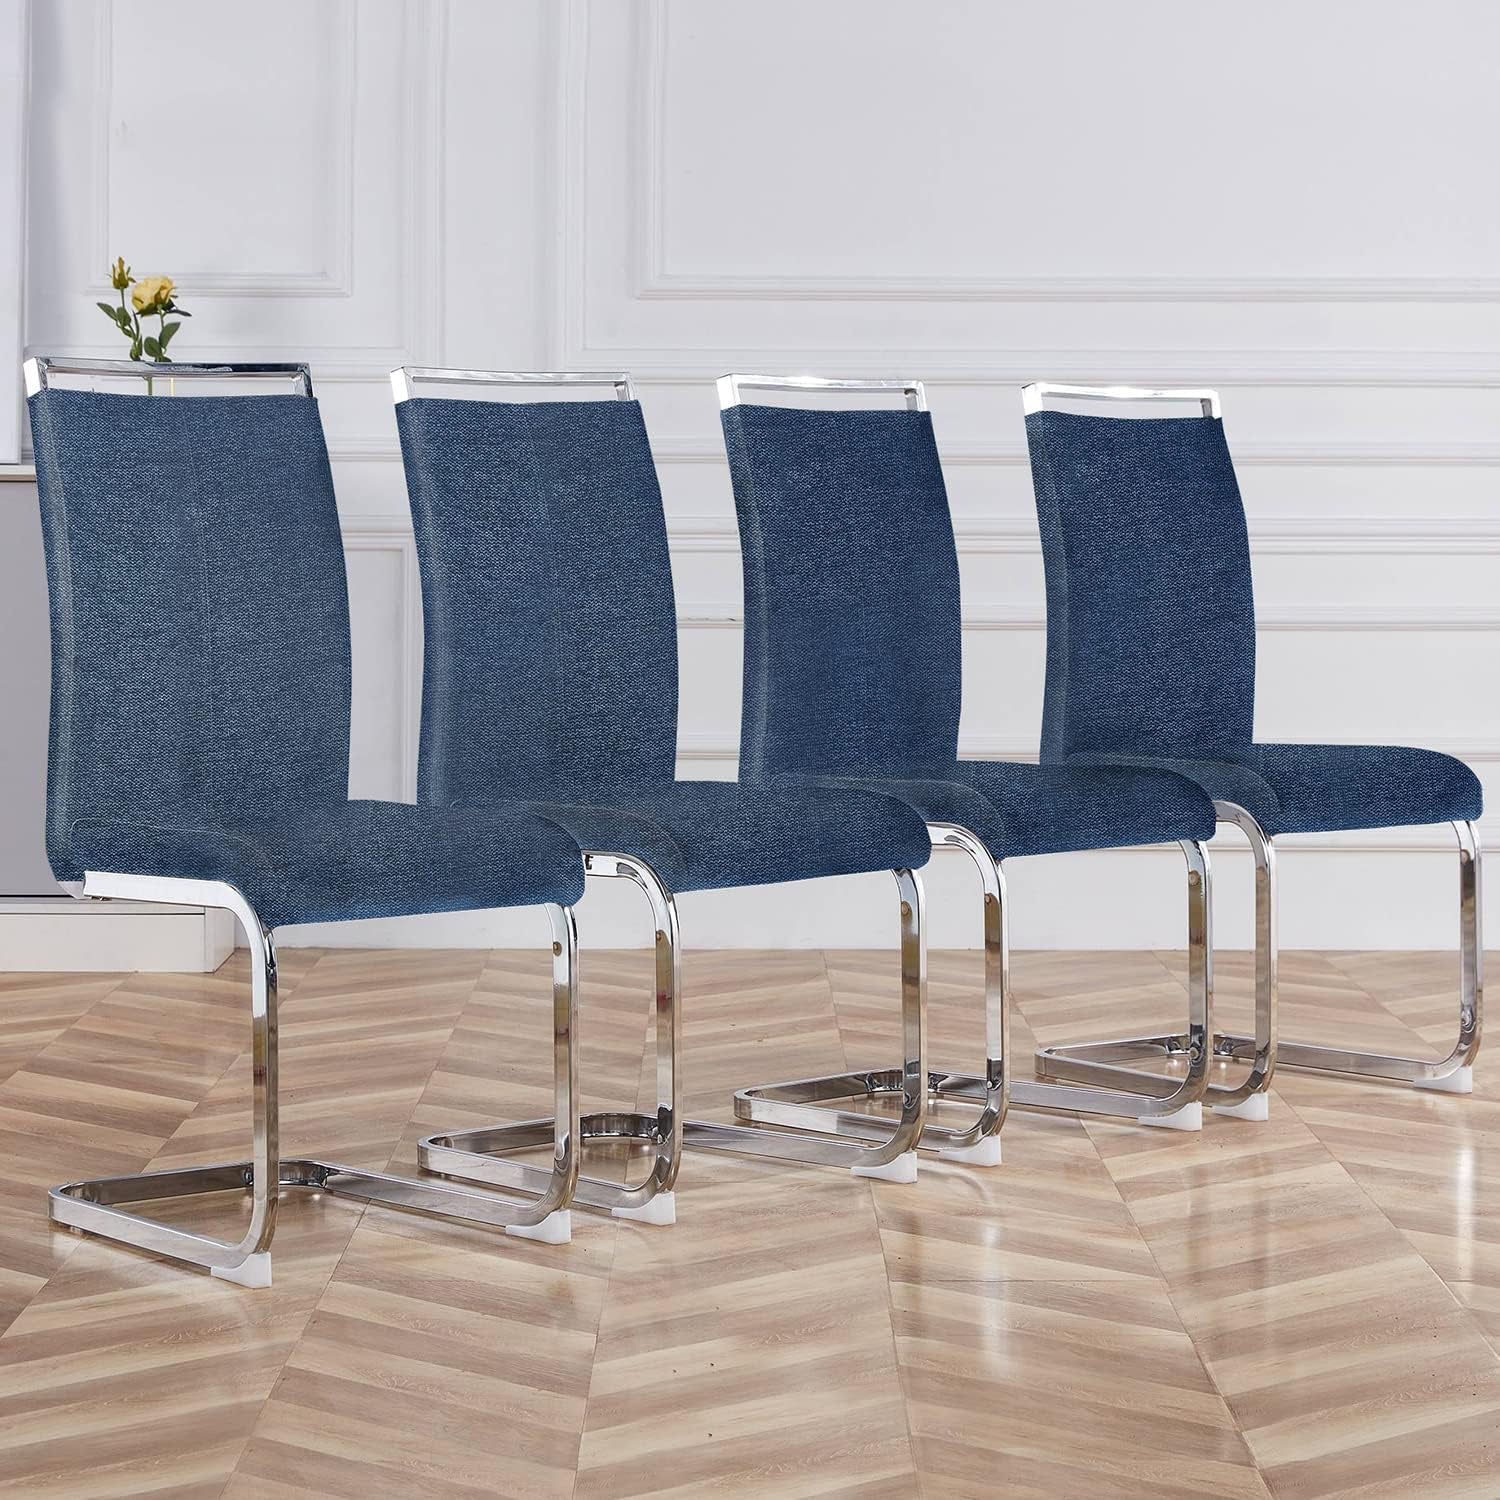 Modern Linen Dining Chairs Set of 4 with Chrome Legs